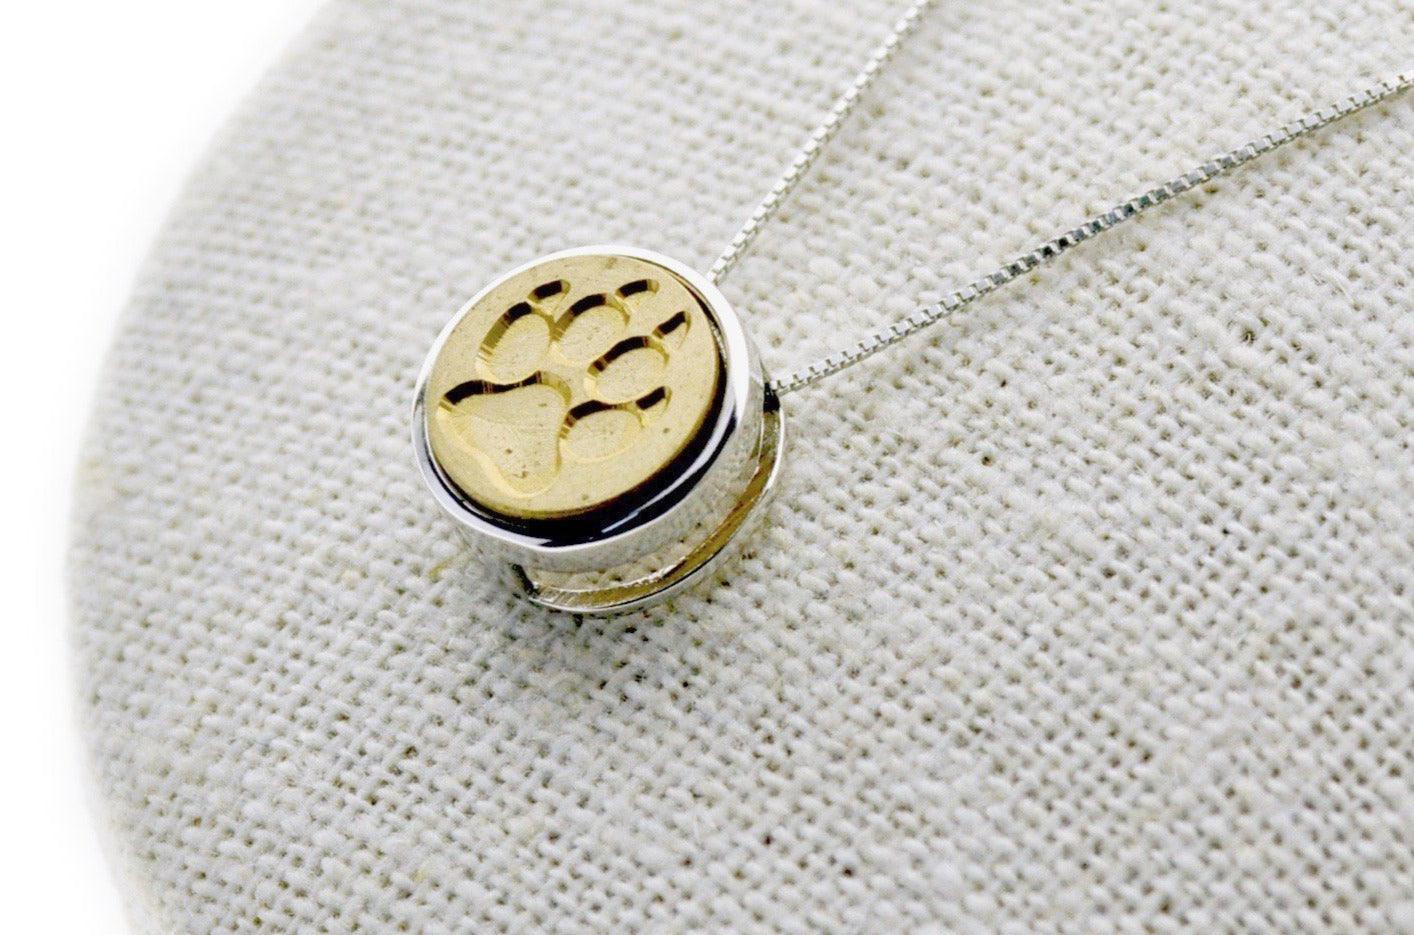 Paw Floating Signet Necklace - Backtozero B20 - 12mm, 12mm necklace, bead, brass, charm, floating, minimal, minimalnecklace, necklace, paw, paw print, signet, signet necklace, silver